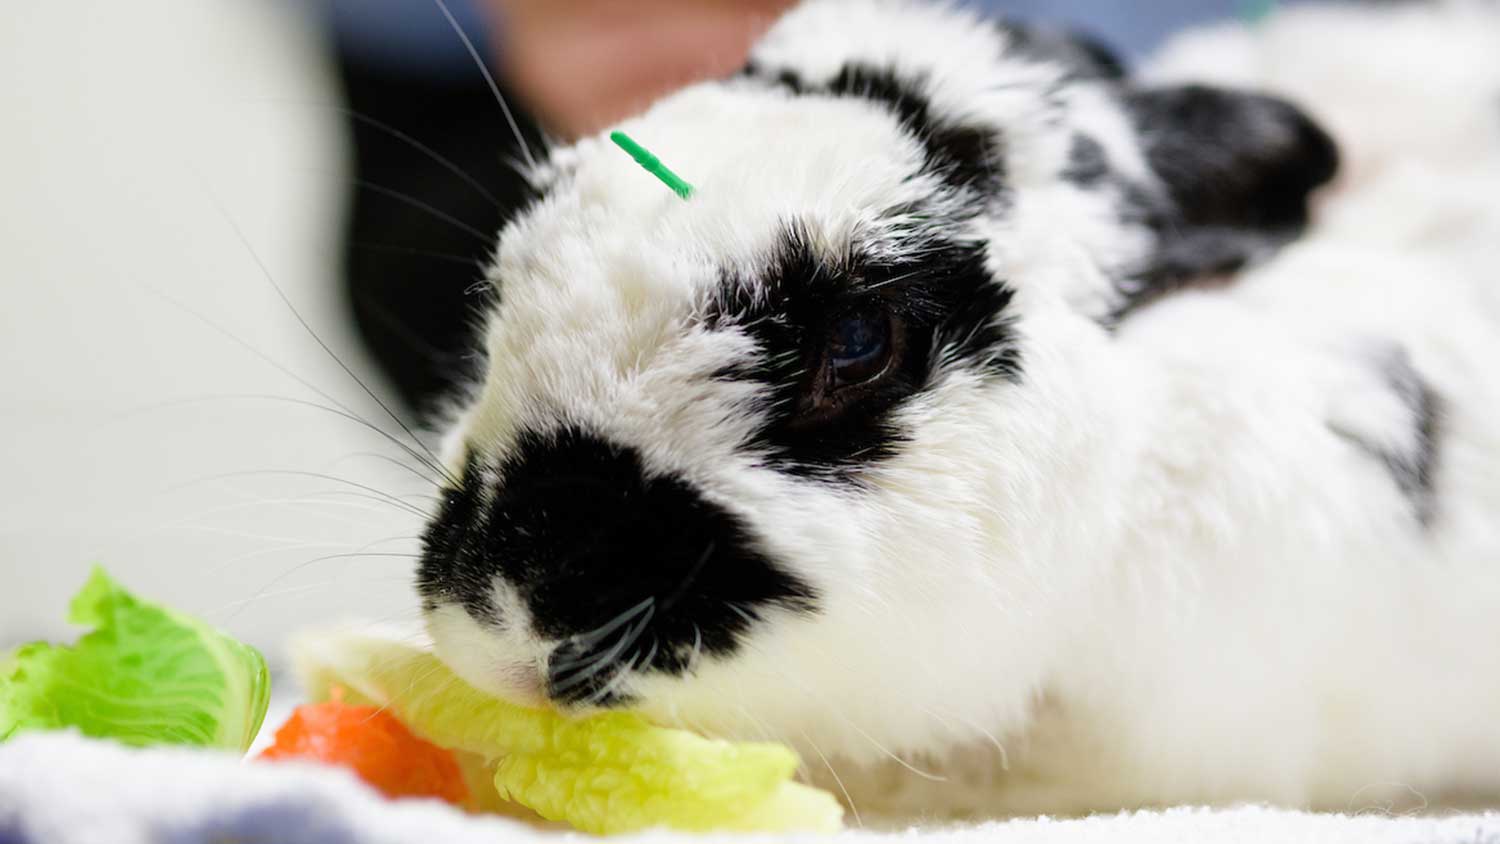 Black and white bunny nibbling on lettuce leaf